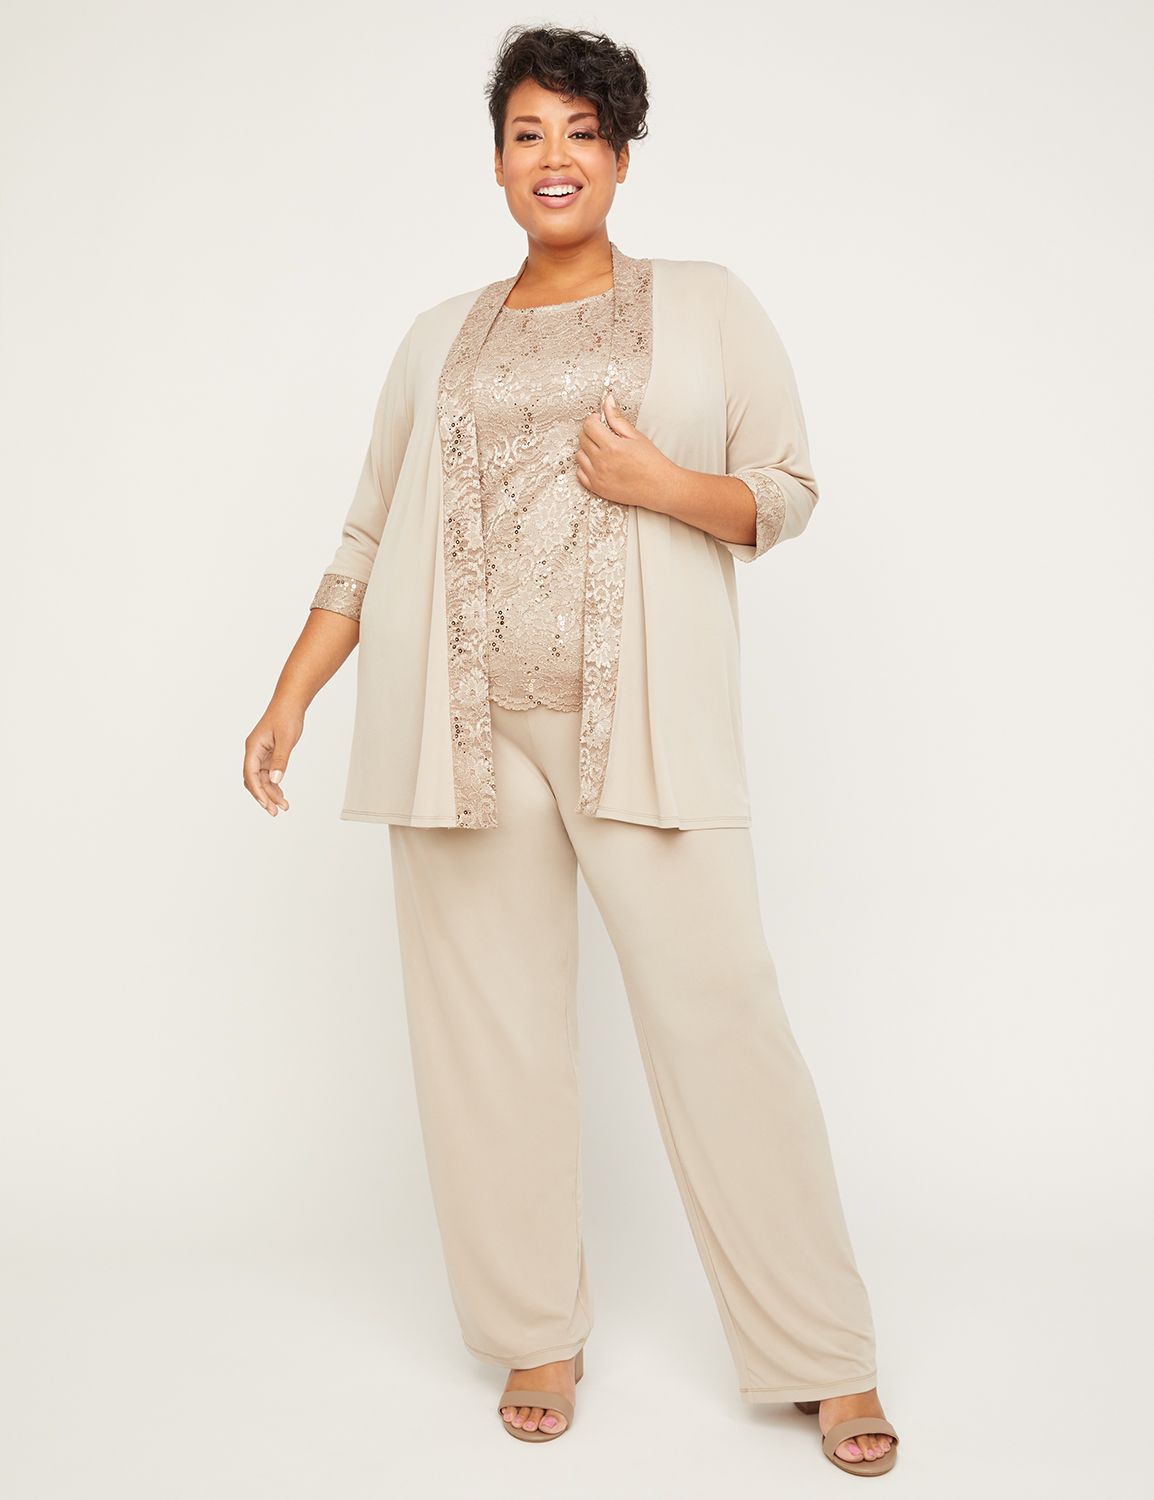 women's plus size mother of the groom pant suits